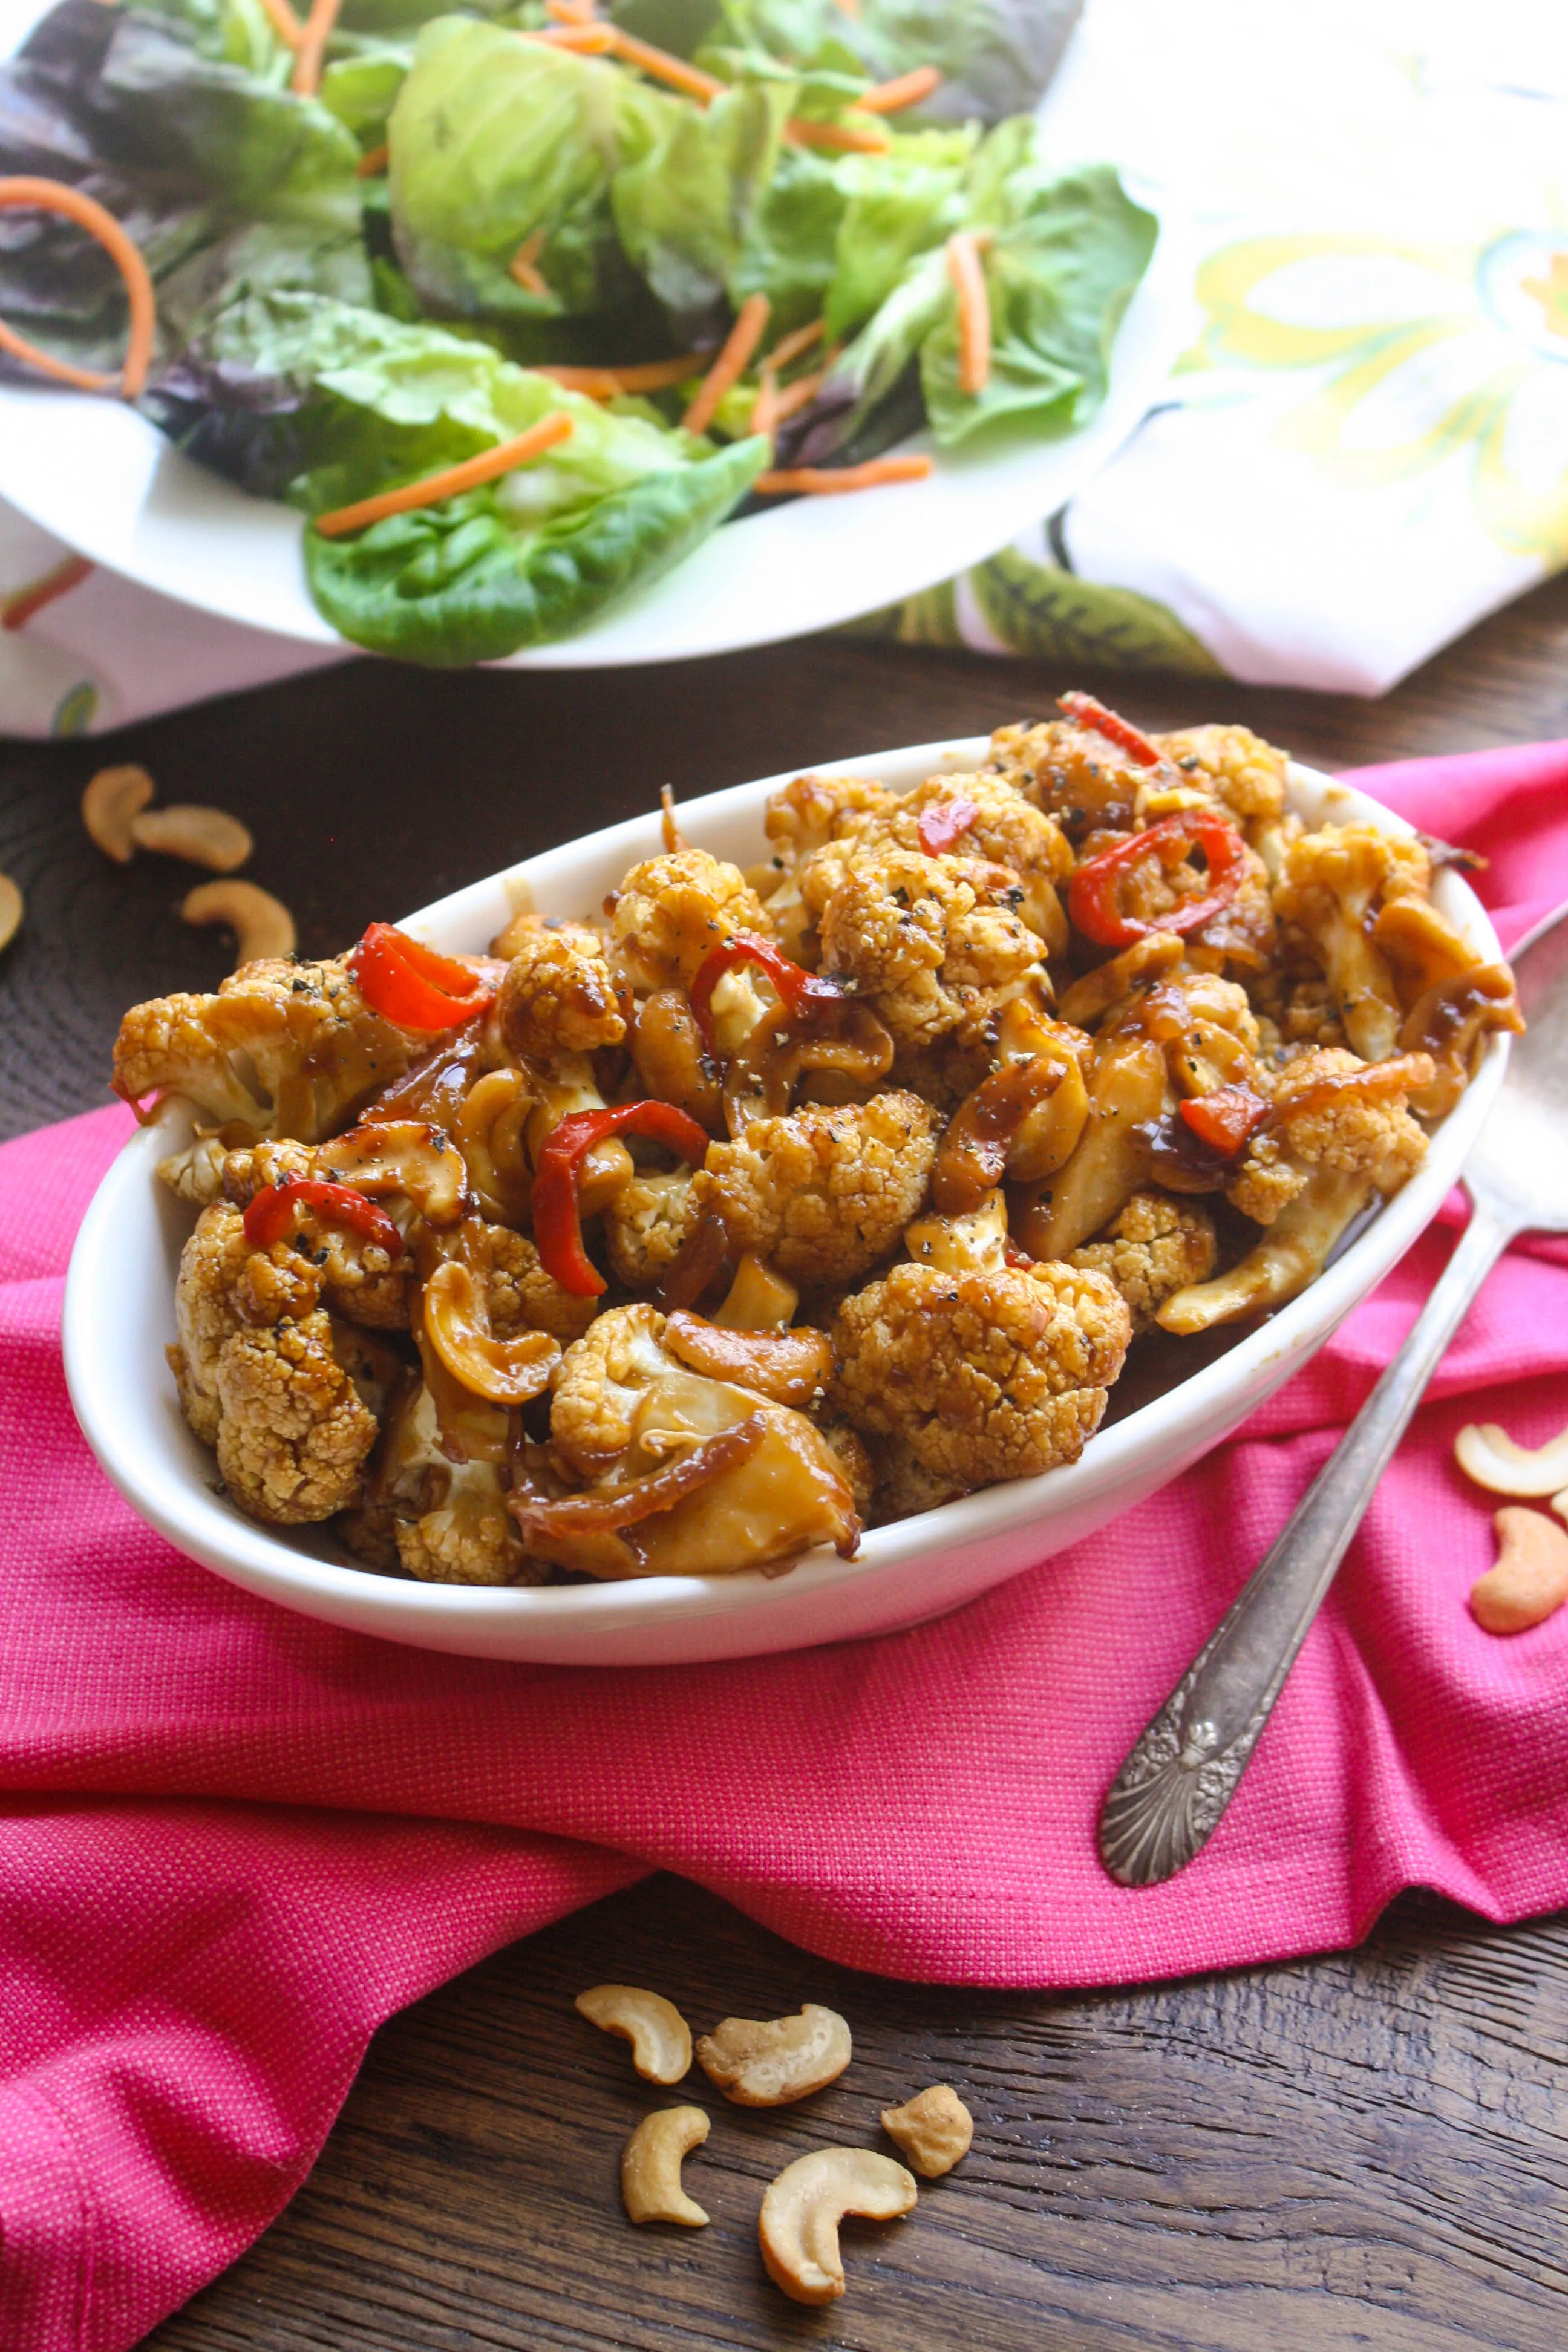 Kung Pao Cauliflower is sweet and spicy and delicious! You'll love the cashews I added for a bit of crunch.